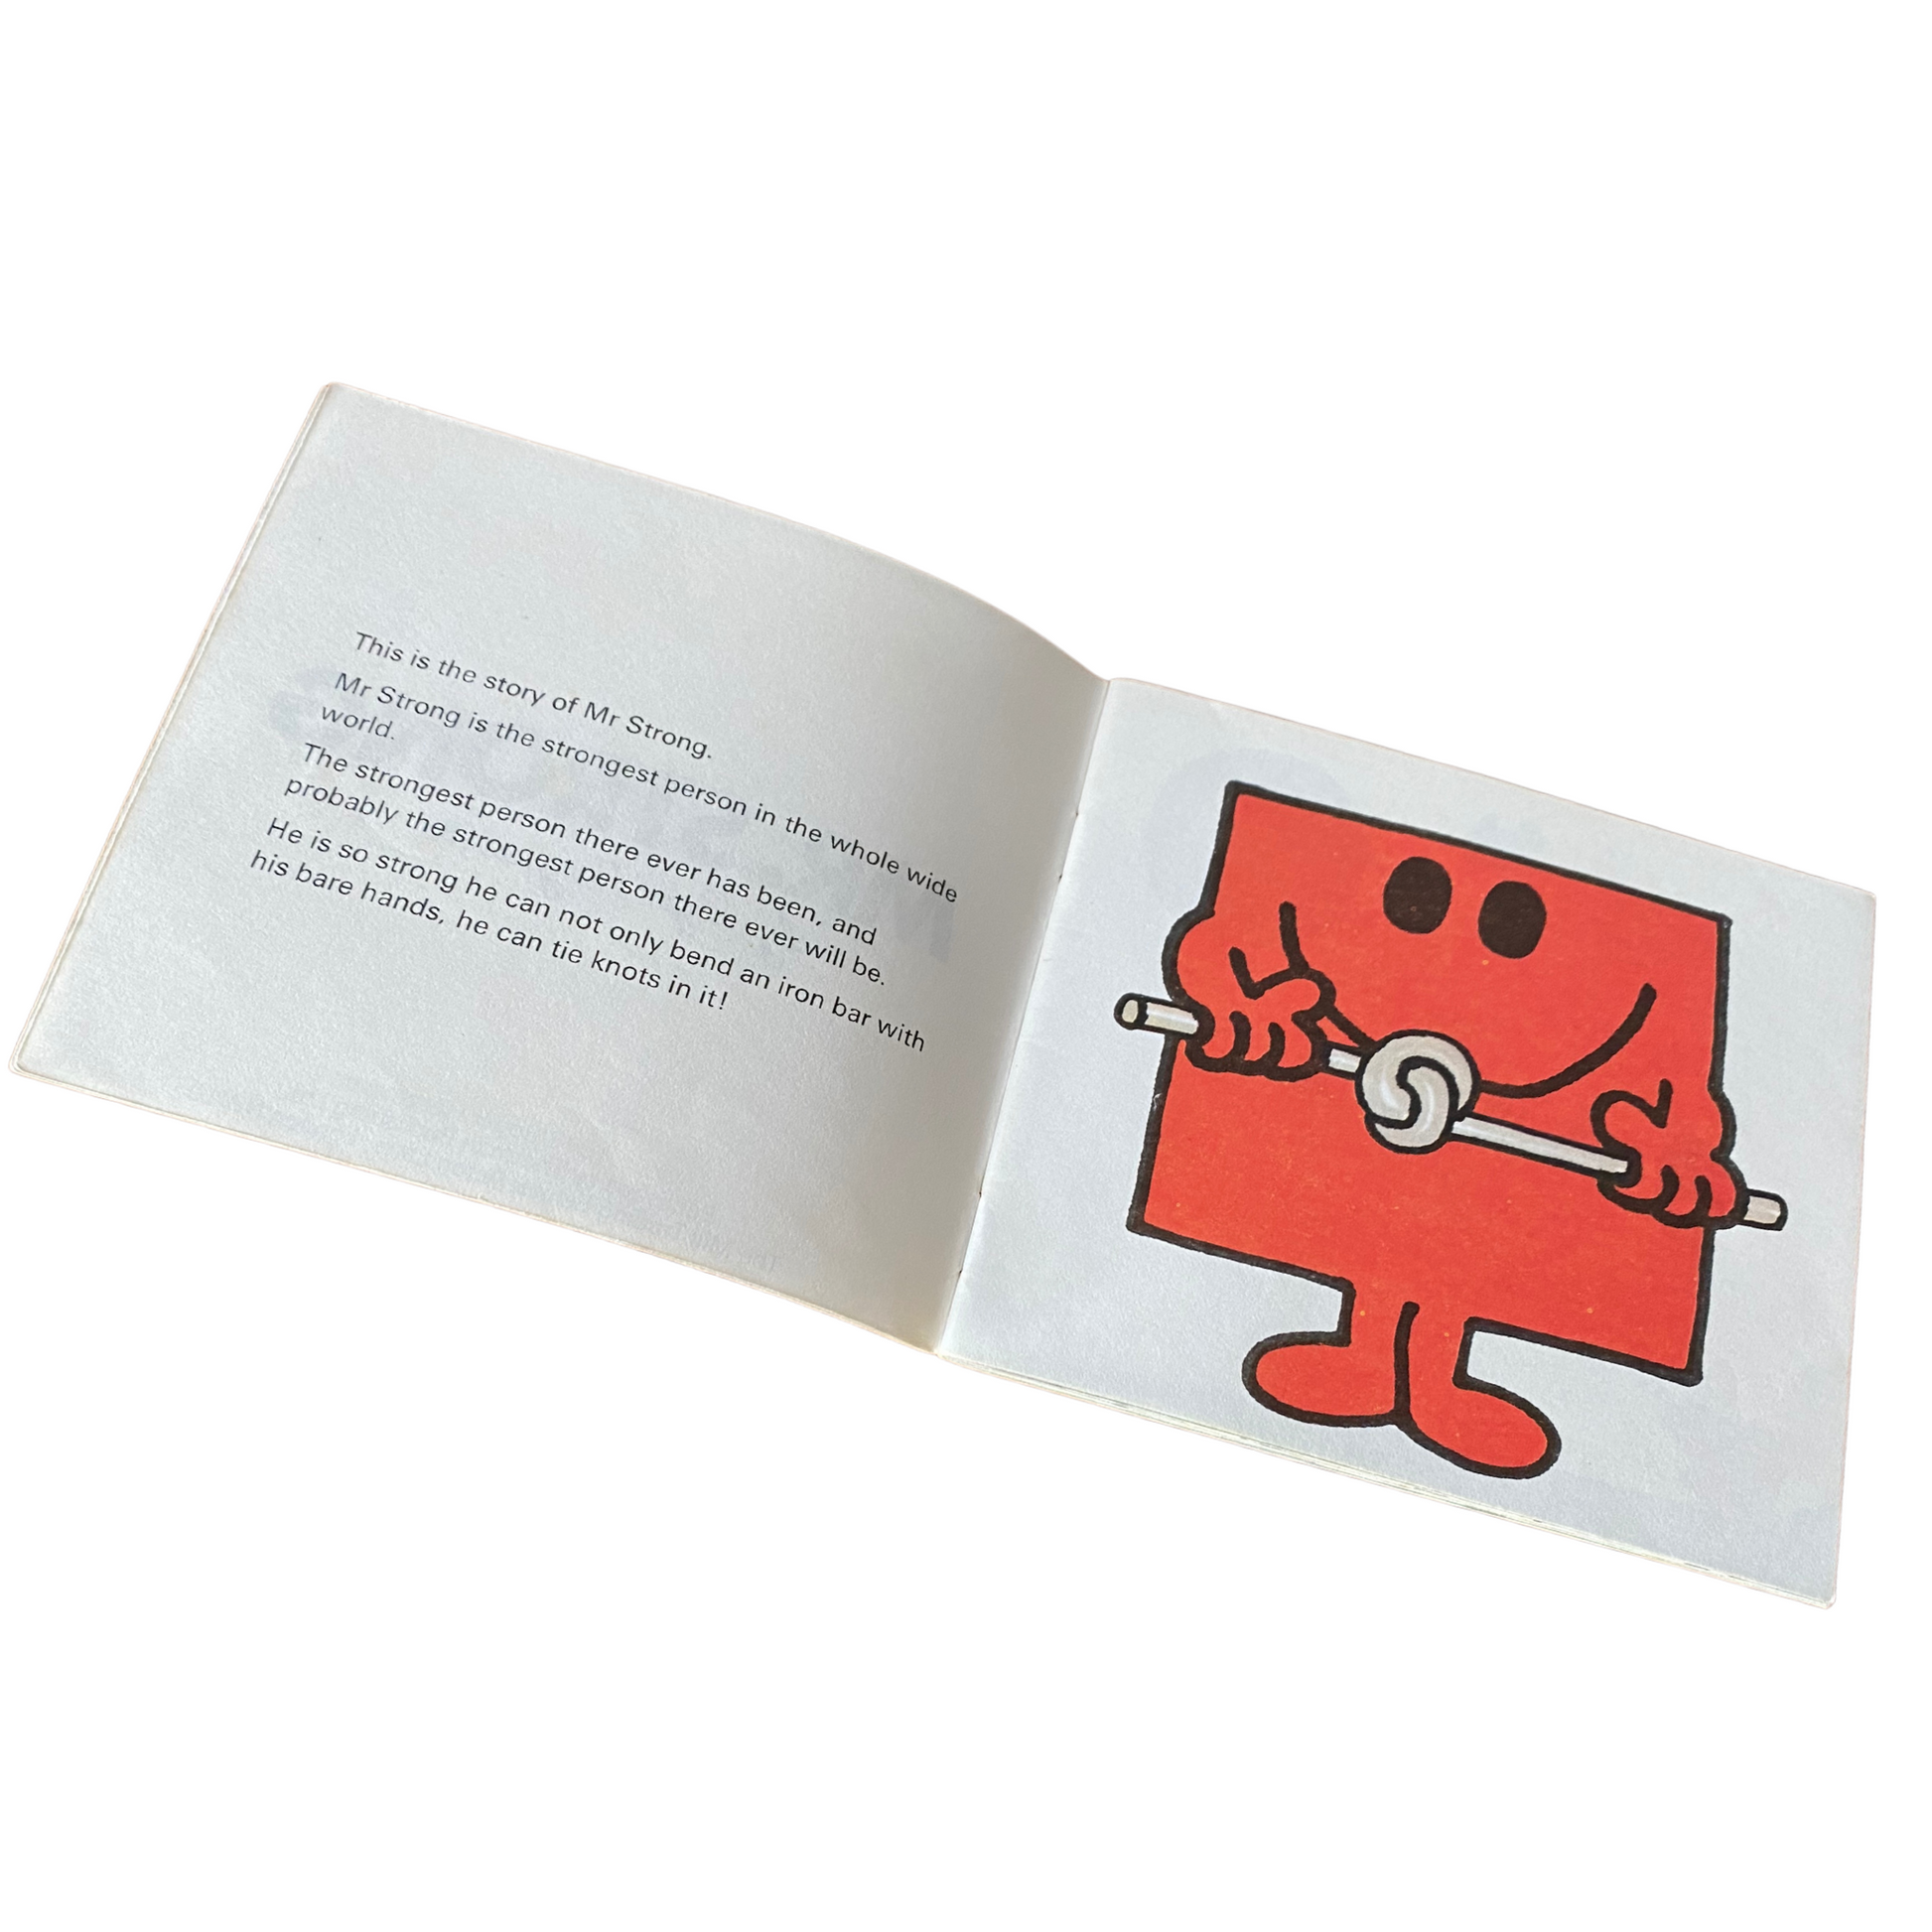 Collectible  Mr Strong  book  - Original 1970s Roger Hargreaves Edition